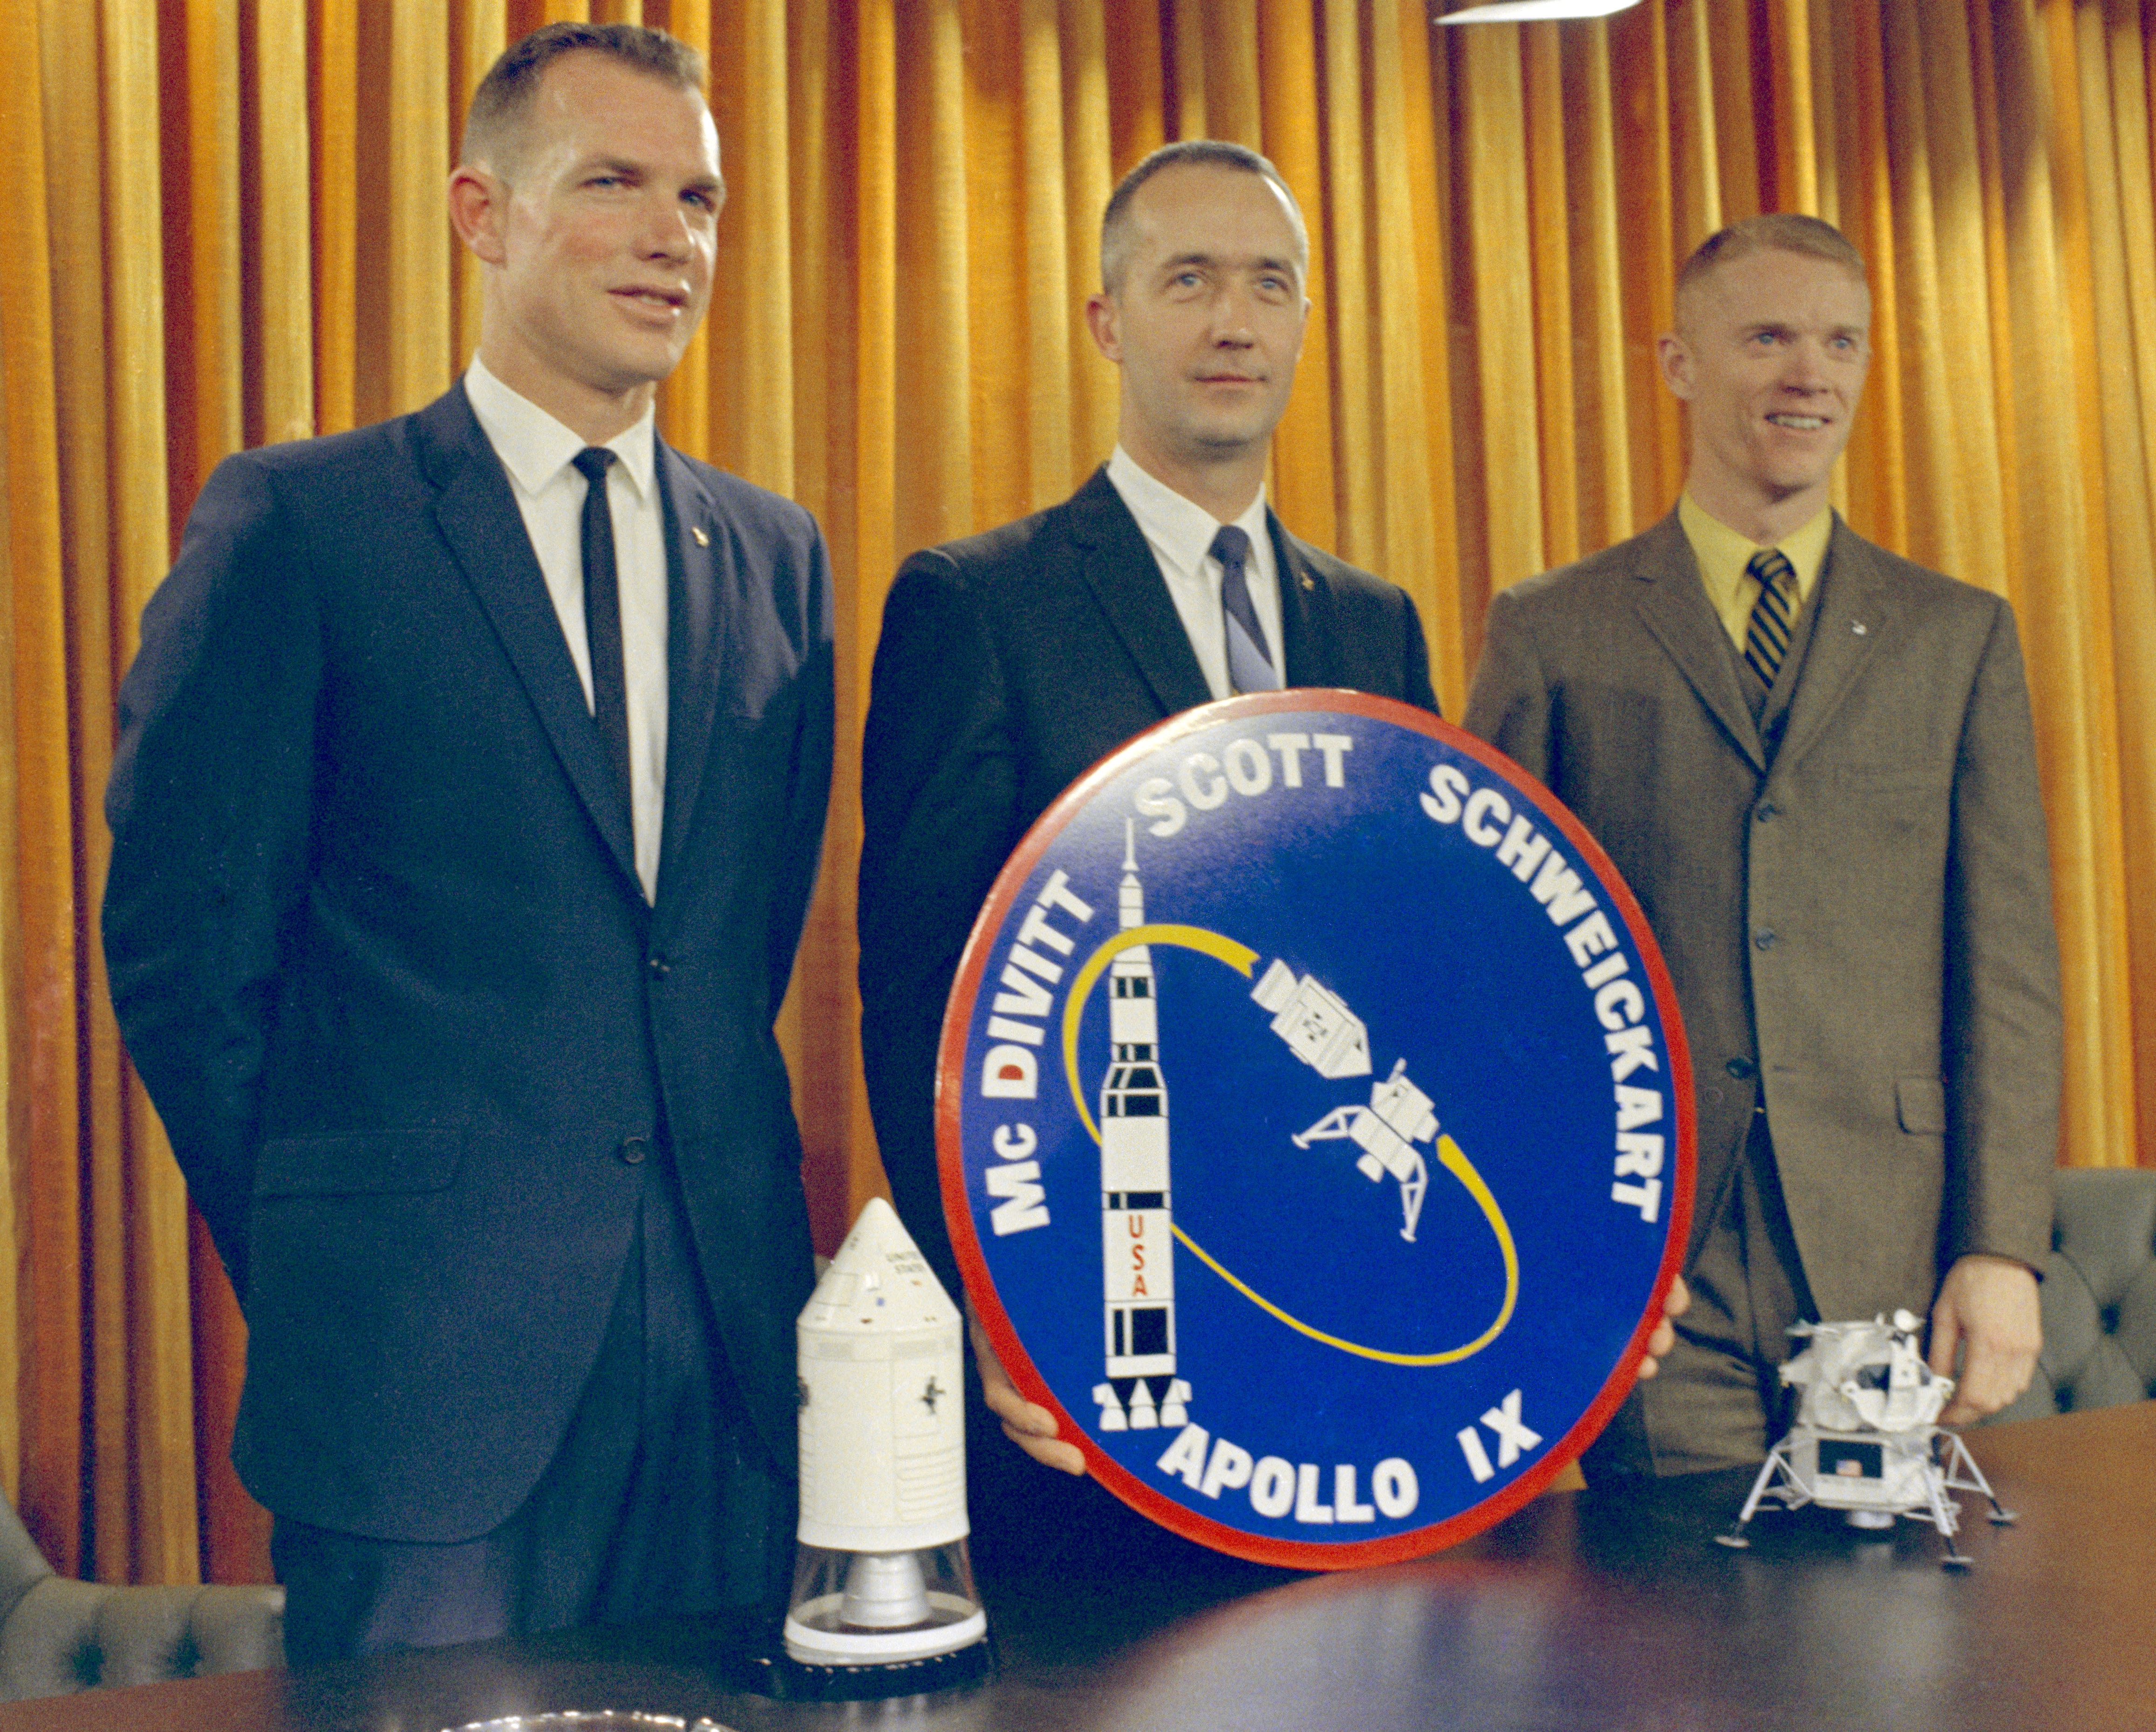 Scott, left, McDivitt, and Schweickart pose with their mission patch following a press conference at Grumman Aircraft and Engineering Corporation in Bethpage, New York